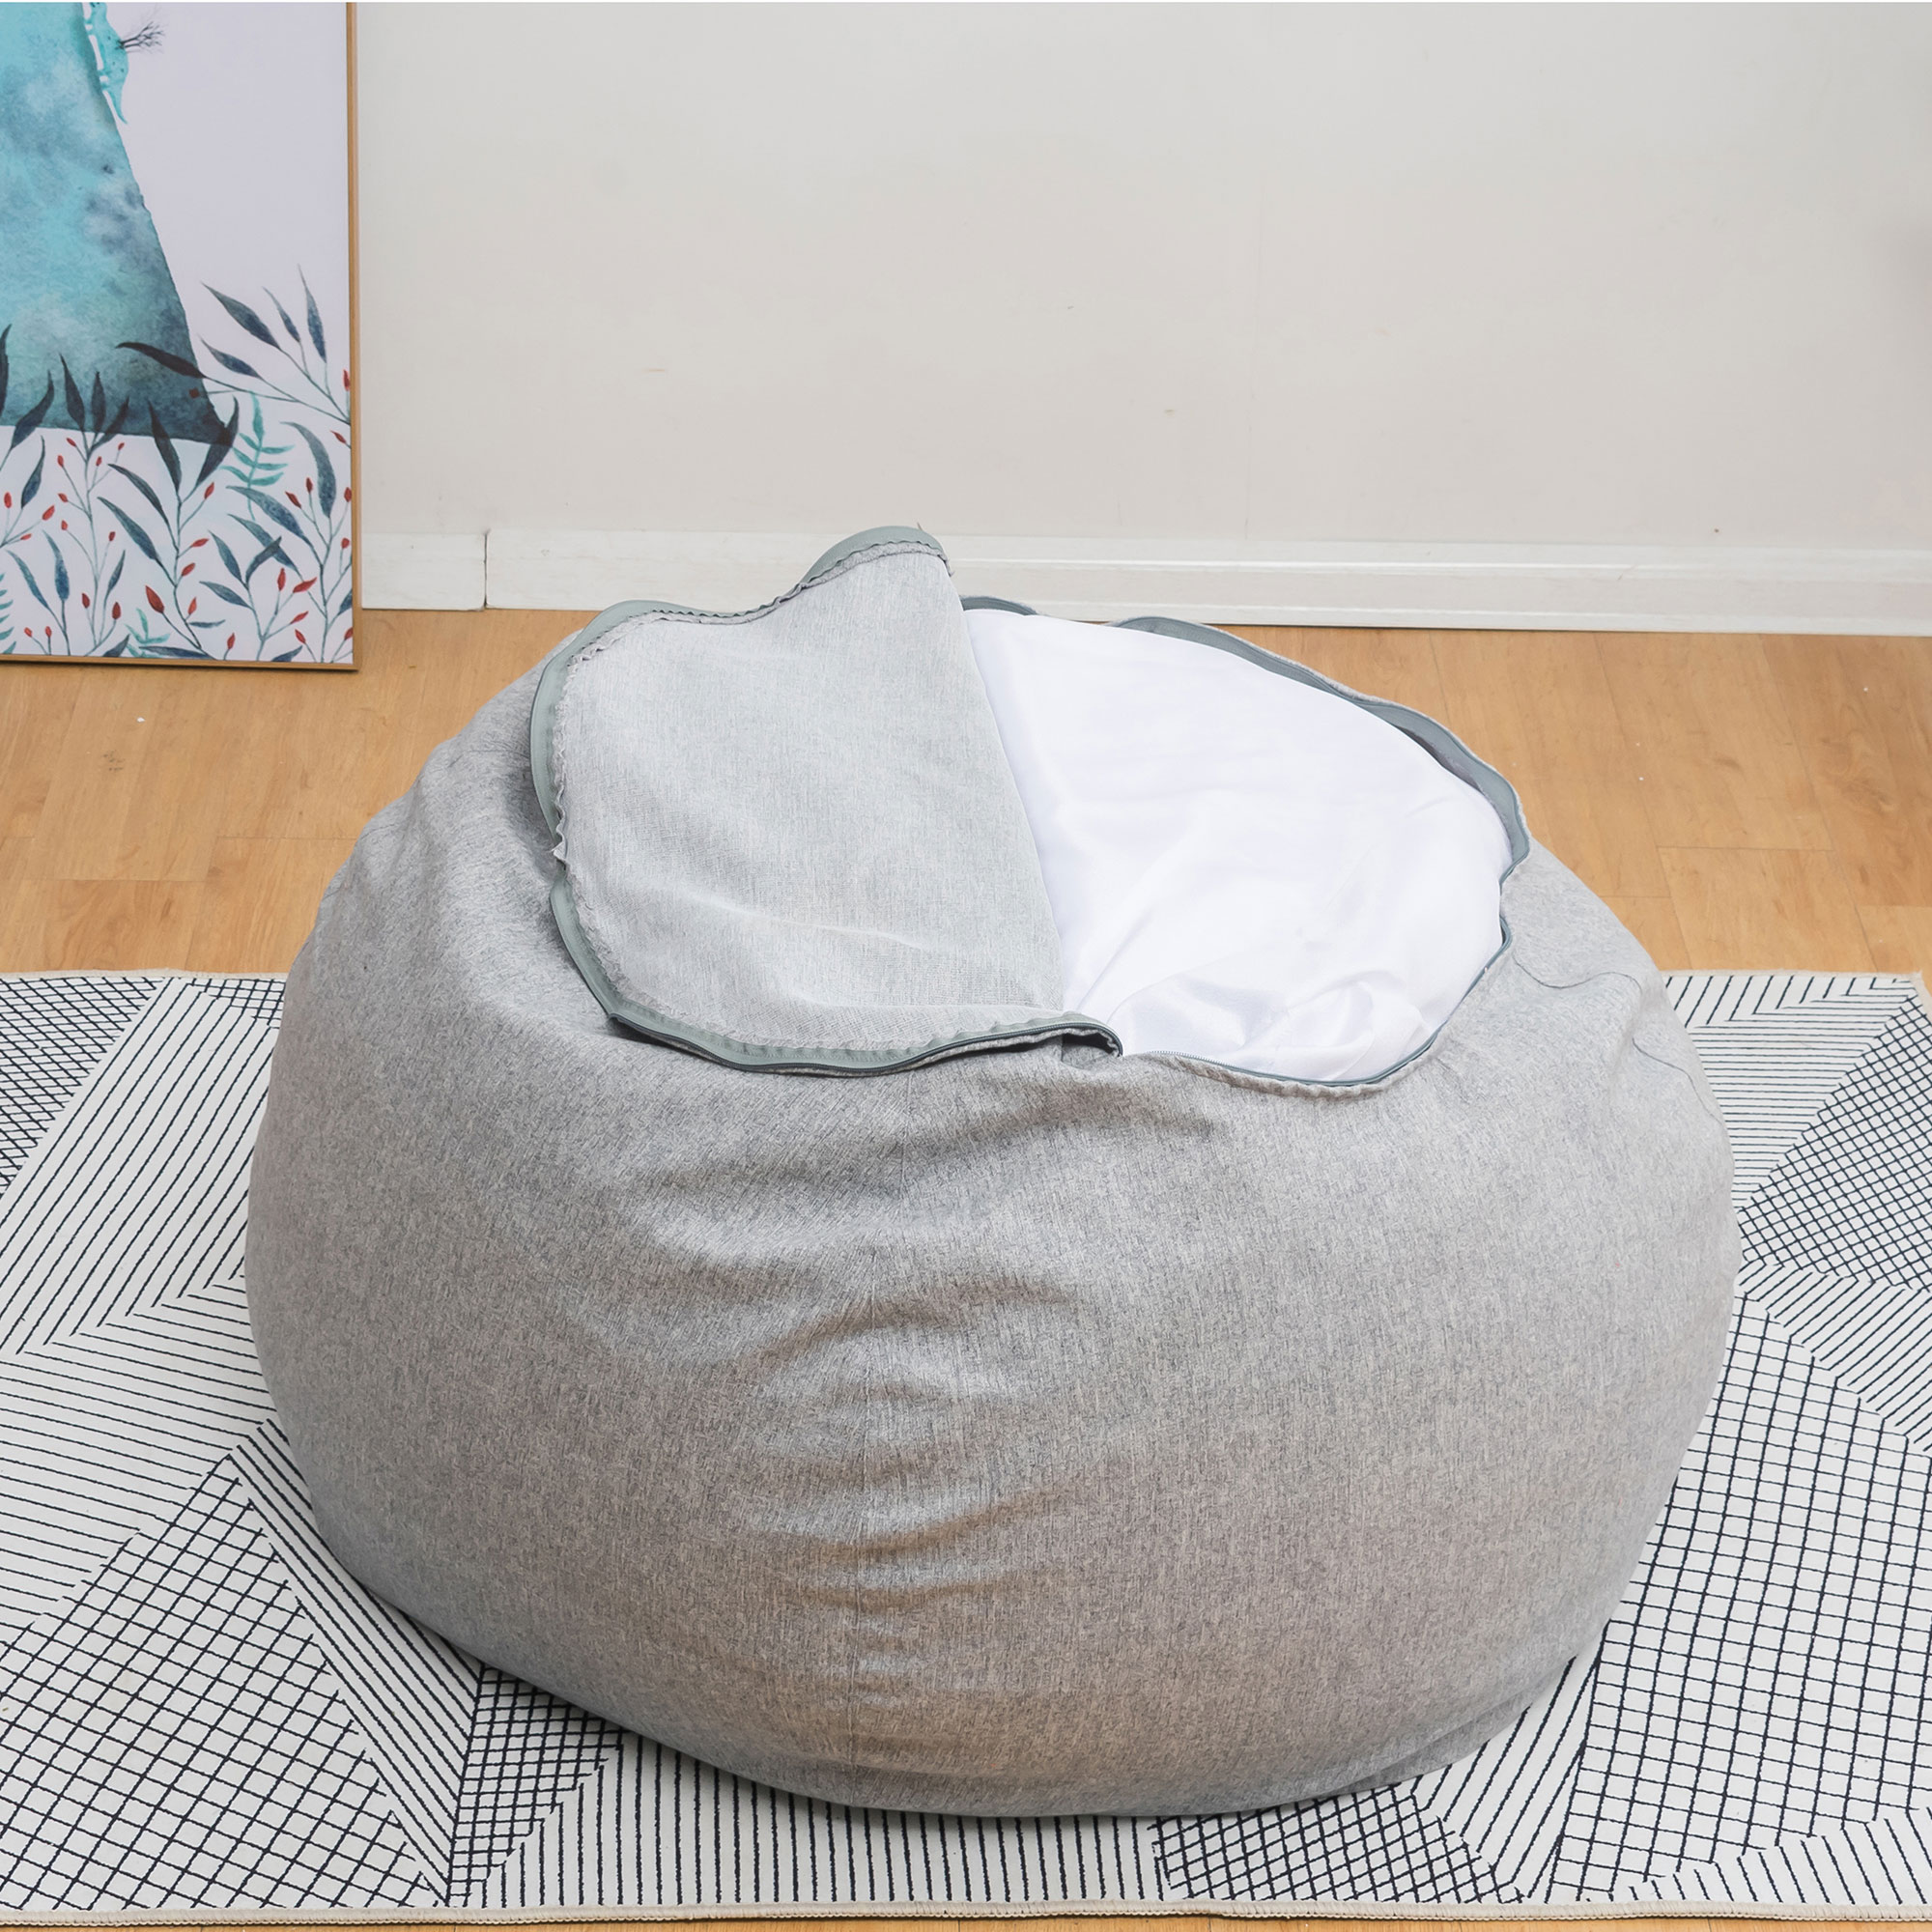 Bean Bag Chair Cover, Sofa Cover Beanbag Chair Cover Perfect for Reading, Alternative Seating Cover for Adults and Kids Cotton Linen Bean Bag Storage Chair Cover without Filling - image 4 of 7